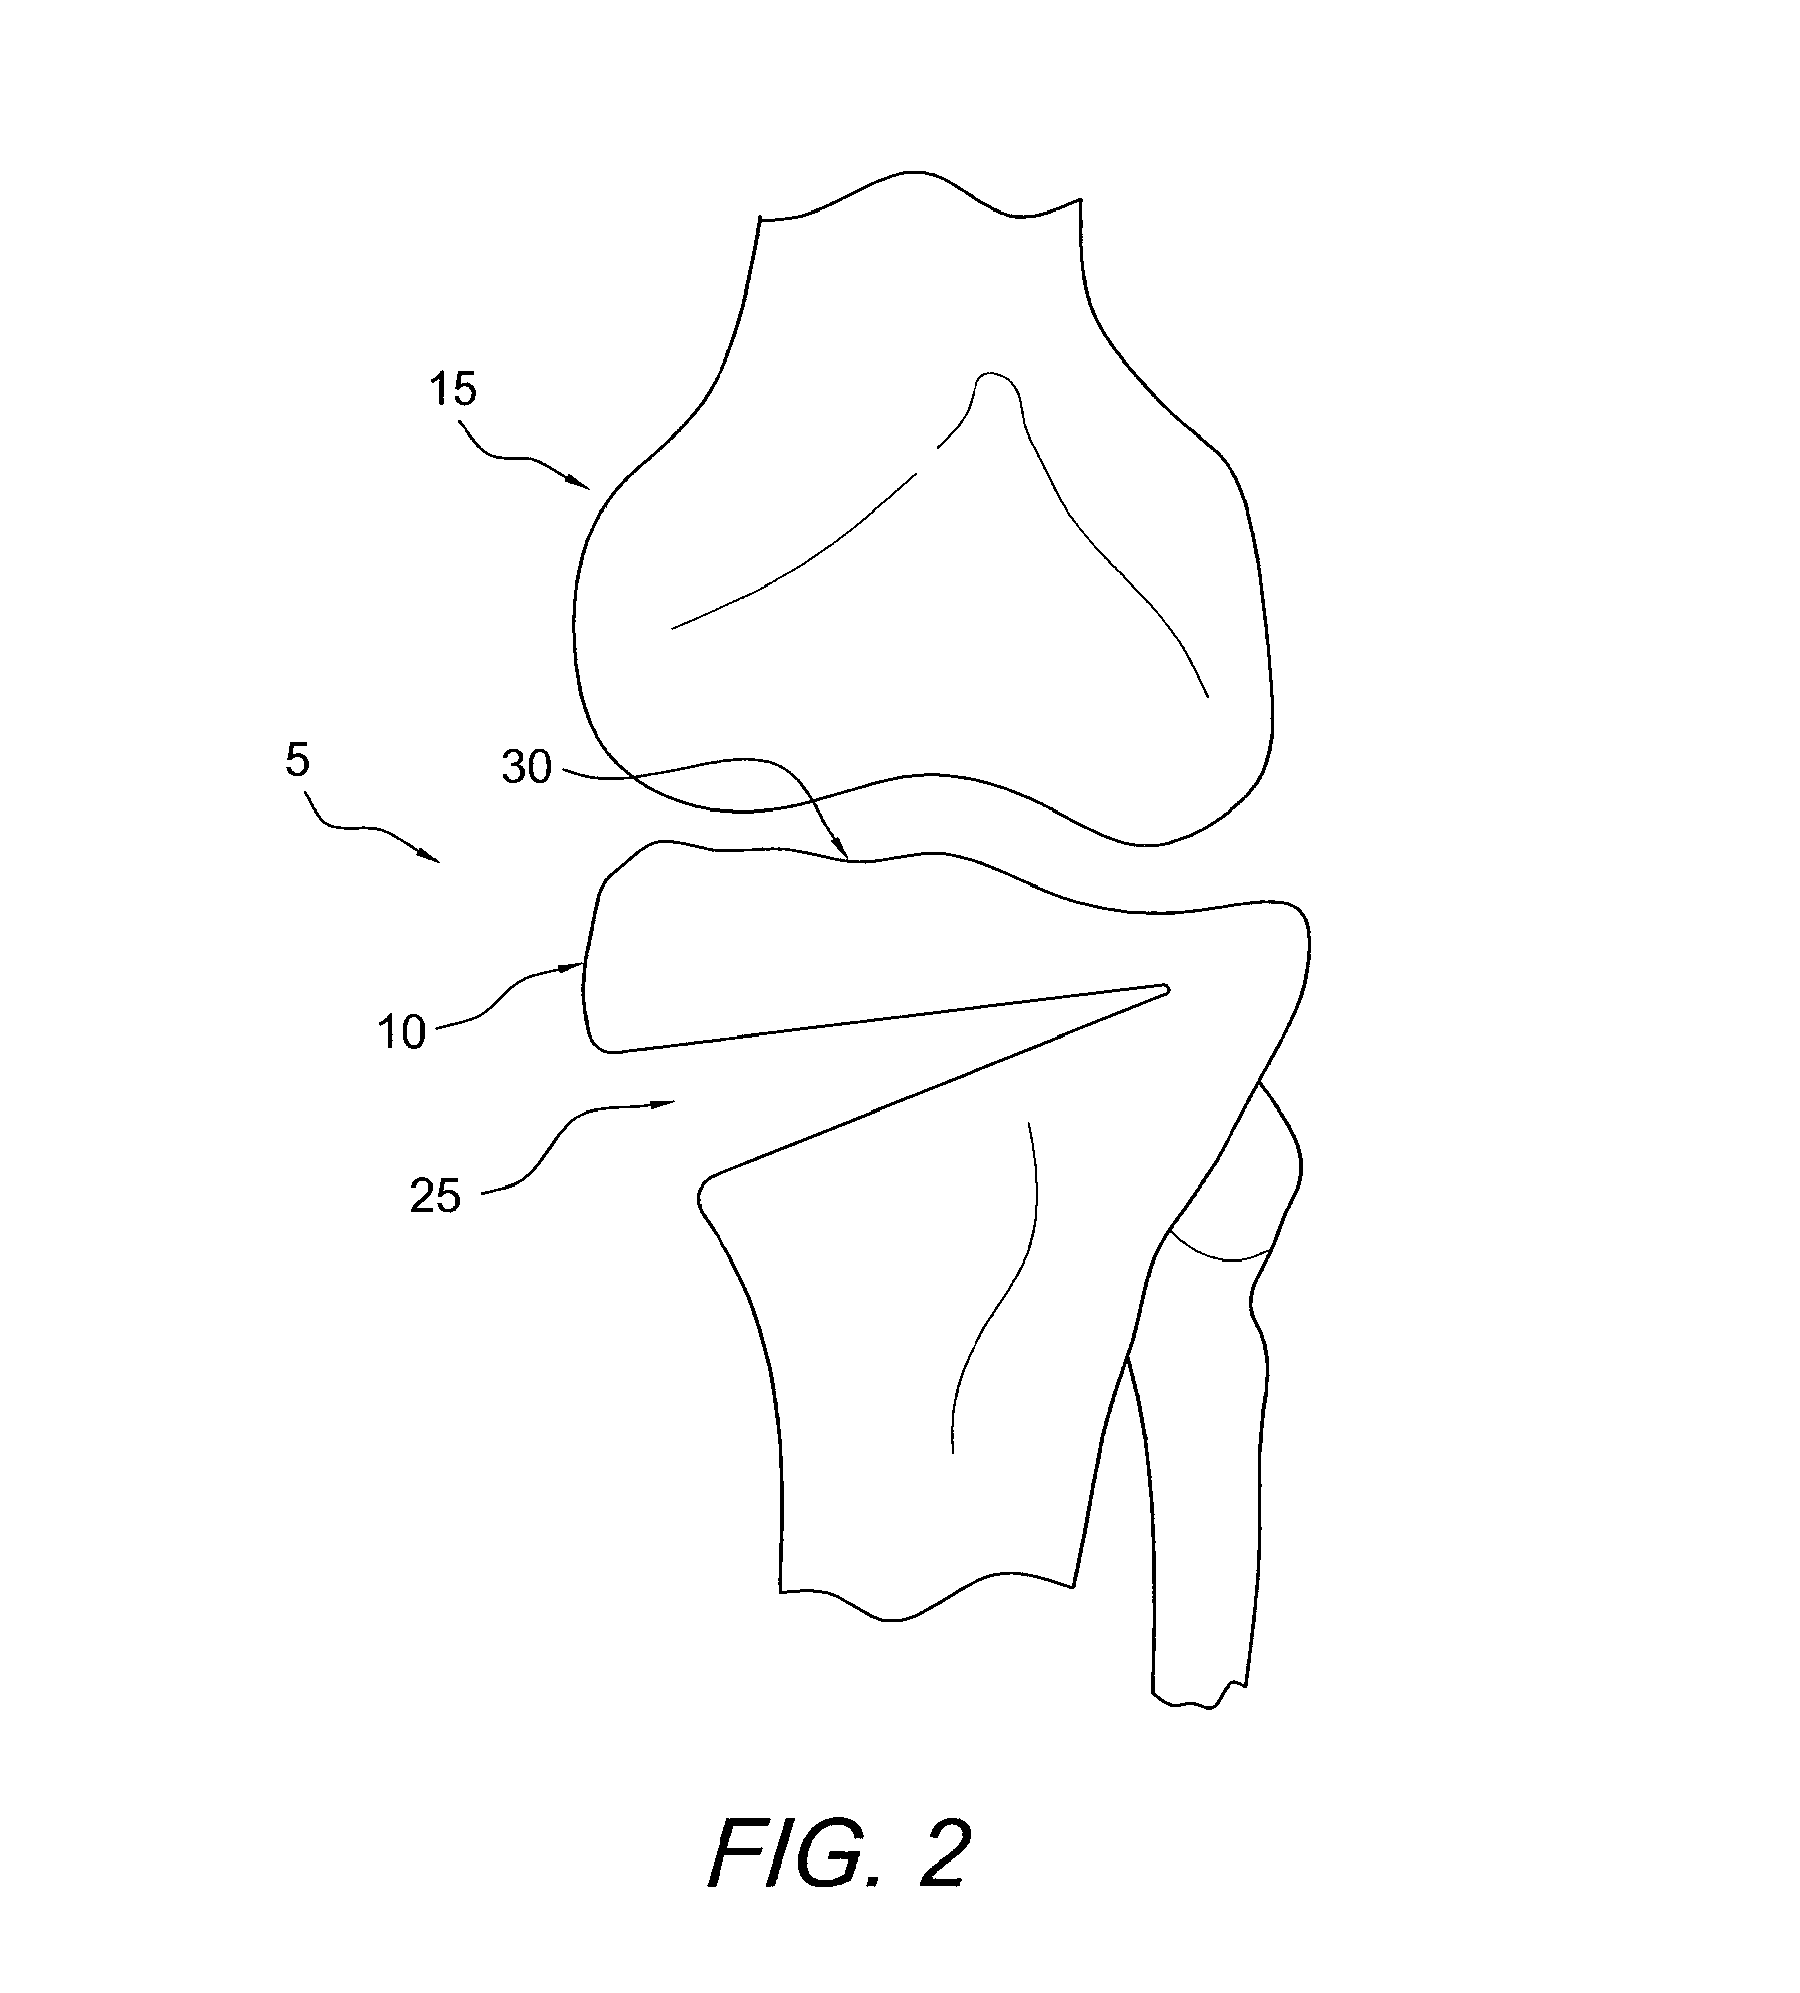 Method for performing an open wedge, high tibial osteotomy